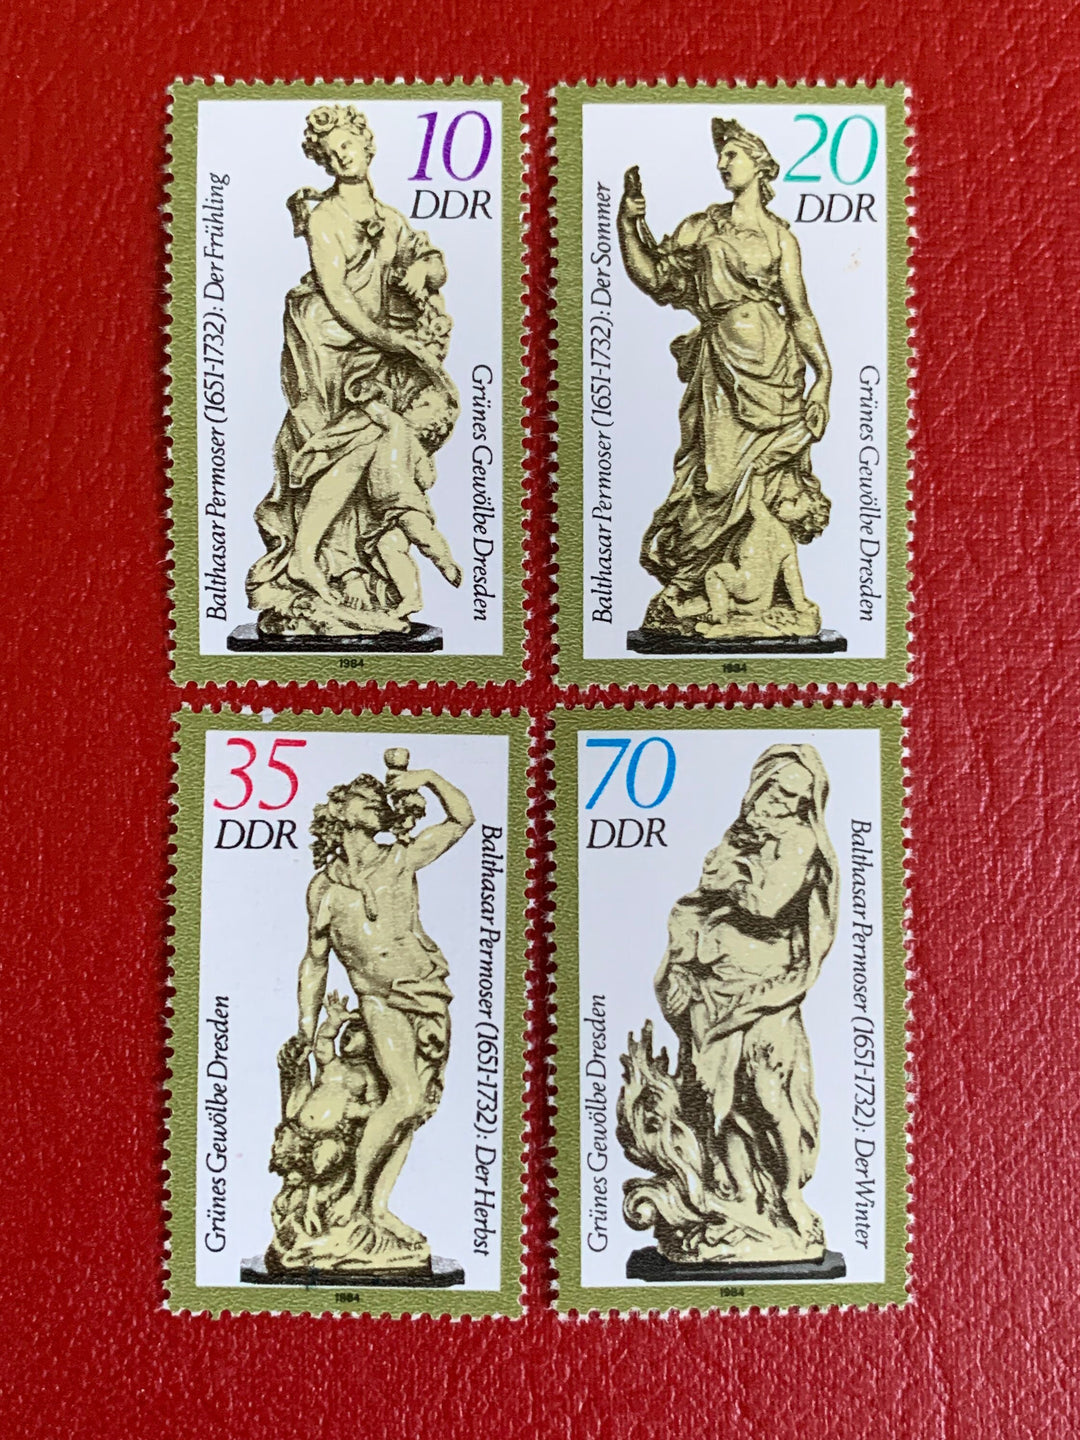 Germany (DDR) - Original Vintage Postage Stamps- 1984 Statues -for the collector, artist or crafter